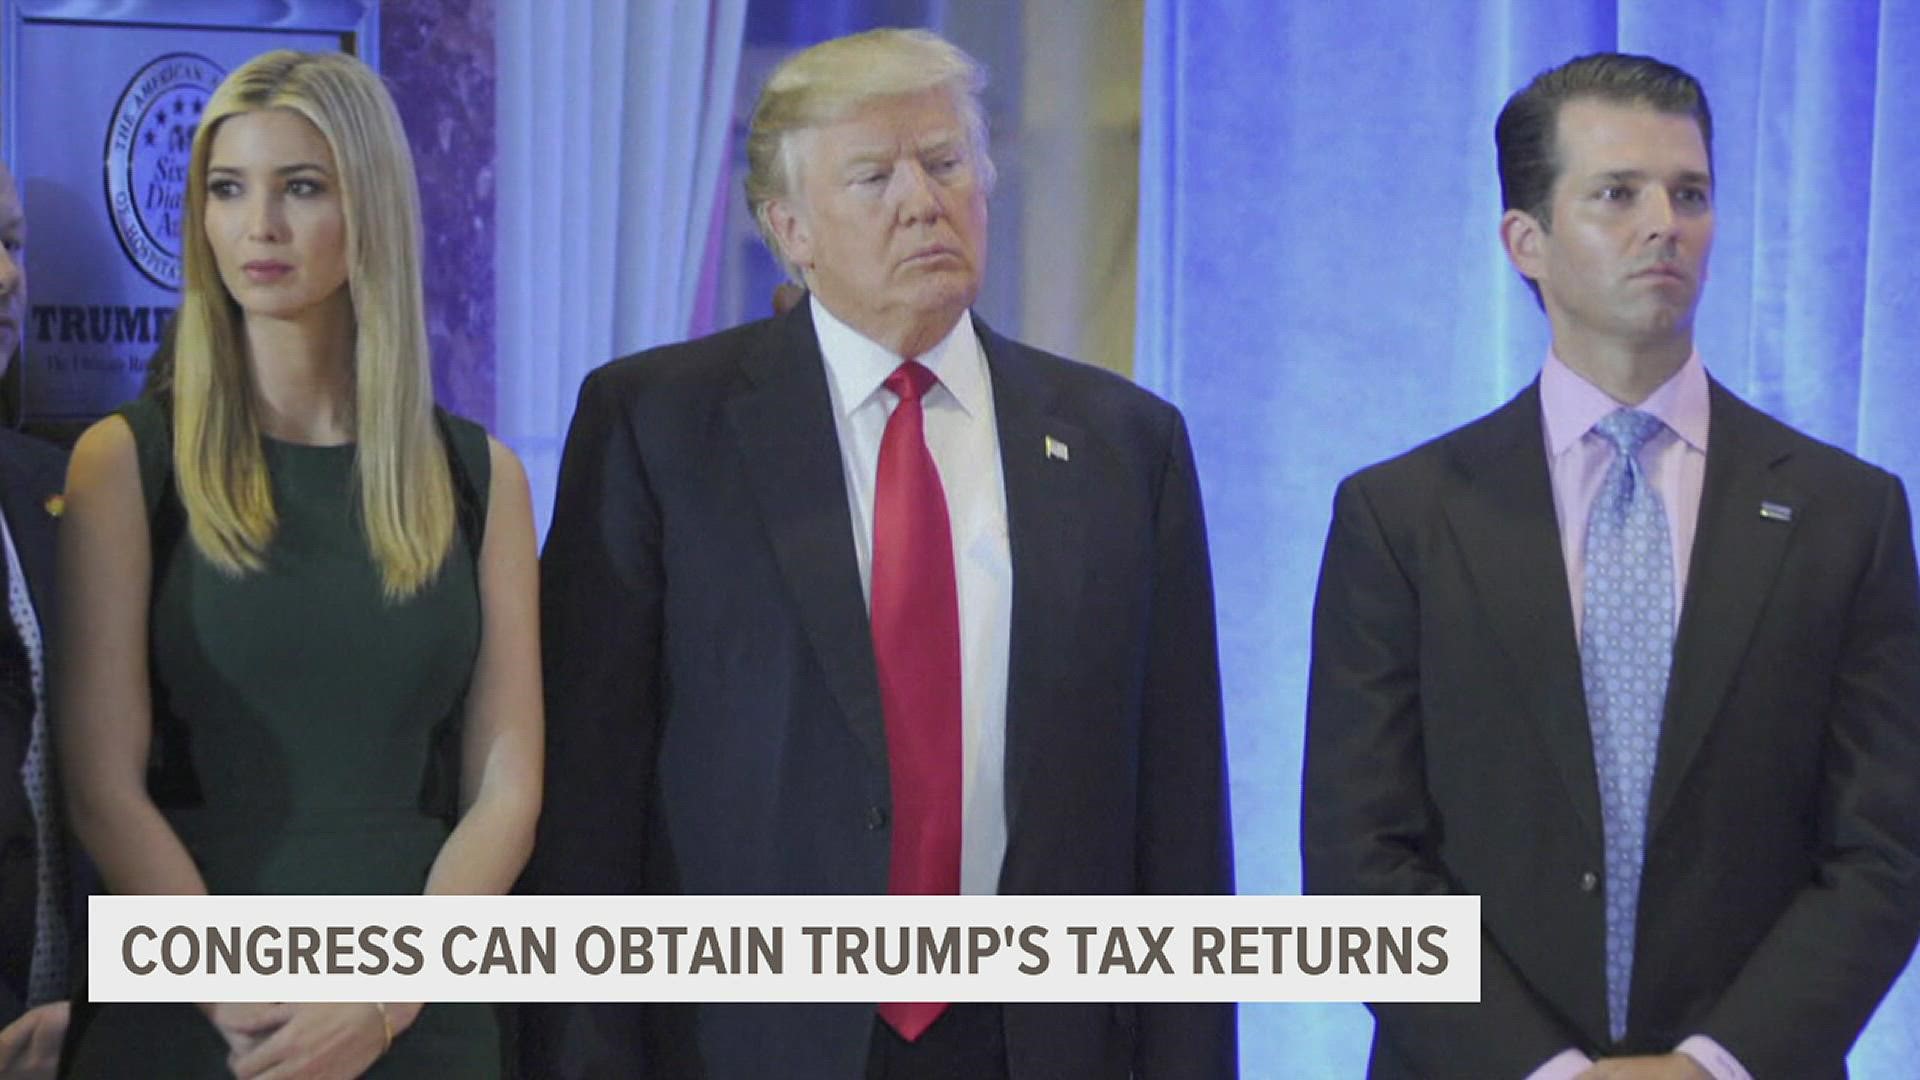 The House Ways and Means panel and its chairman first requested Trump's tax returns in 2019.